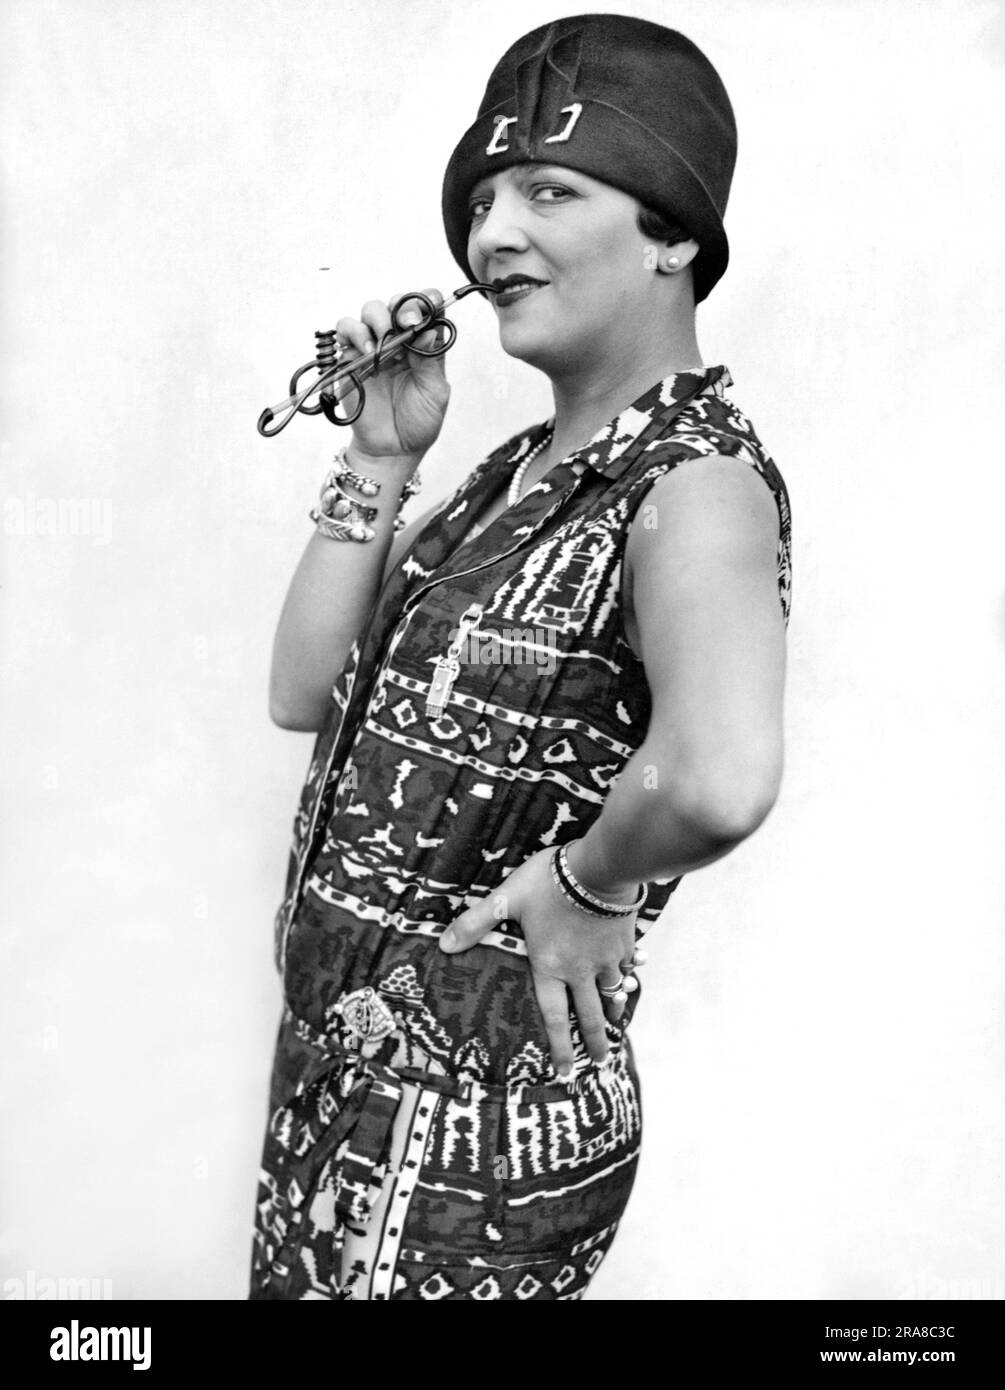 New York, New York:  October 13, 1926 Popular stage actress Irene Bordini with her pretzel cigarette holder as she arrives from Europe aboard the ocean liner, the S.S. France. Stock Photo